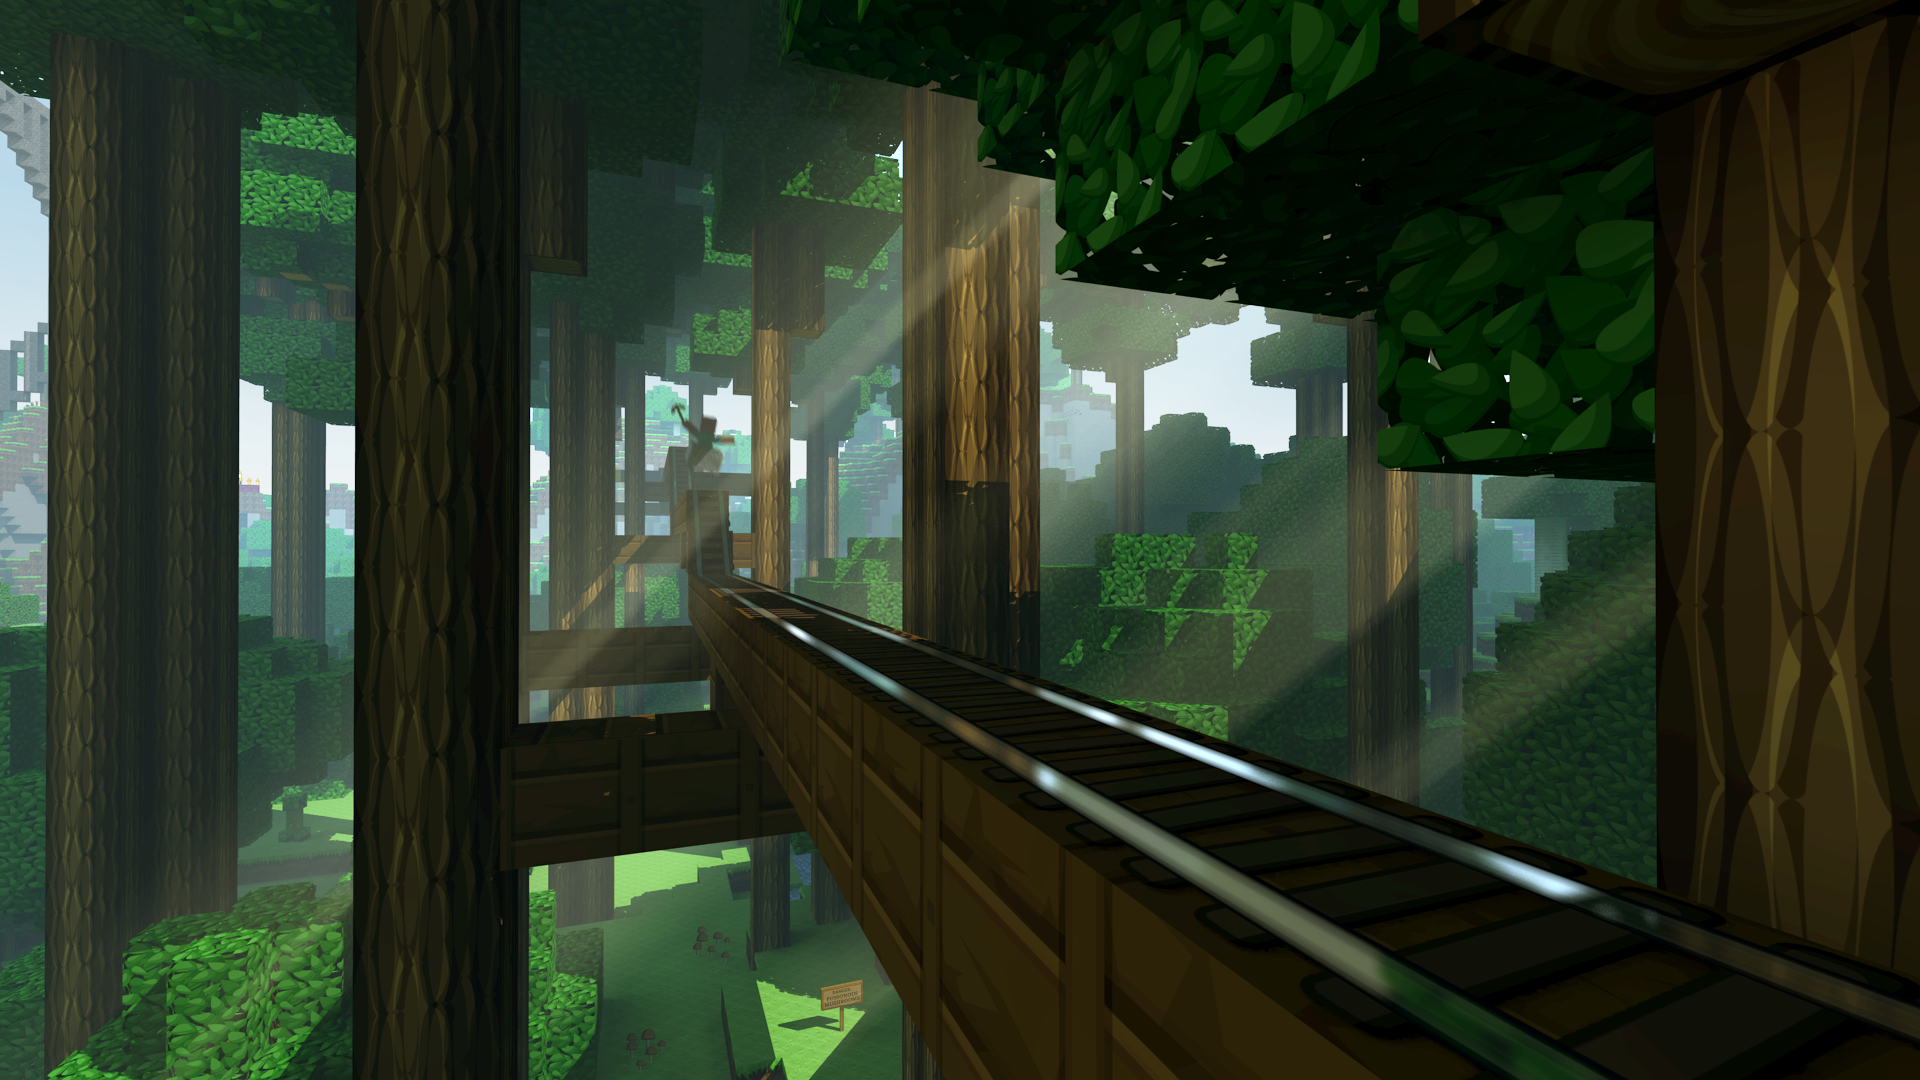 General 1920x1080 Minecraft railway trees signs creeper sun rays video games PC gaming screen shot